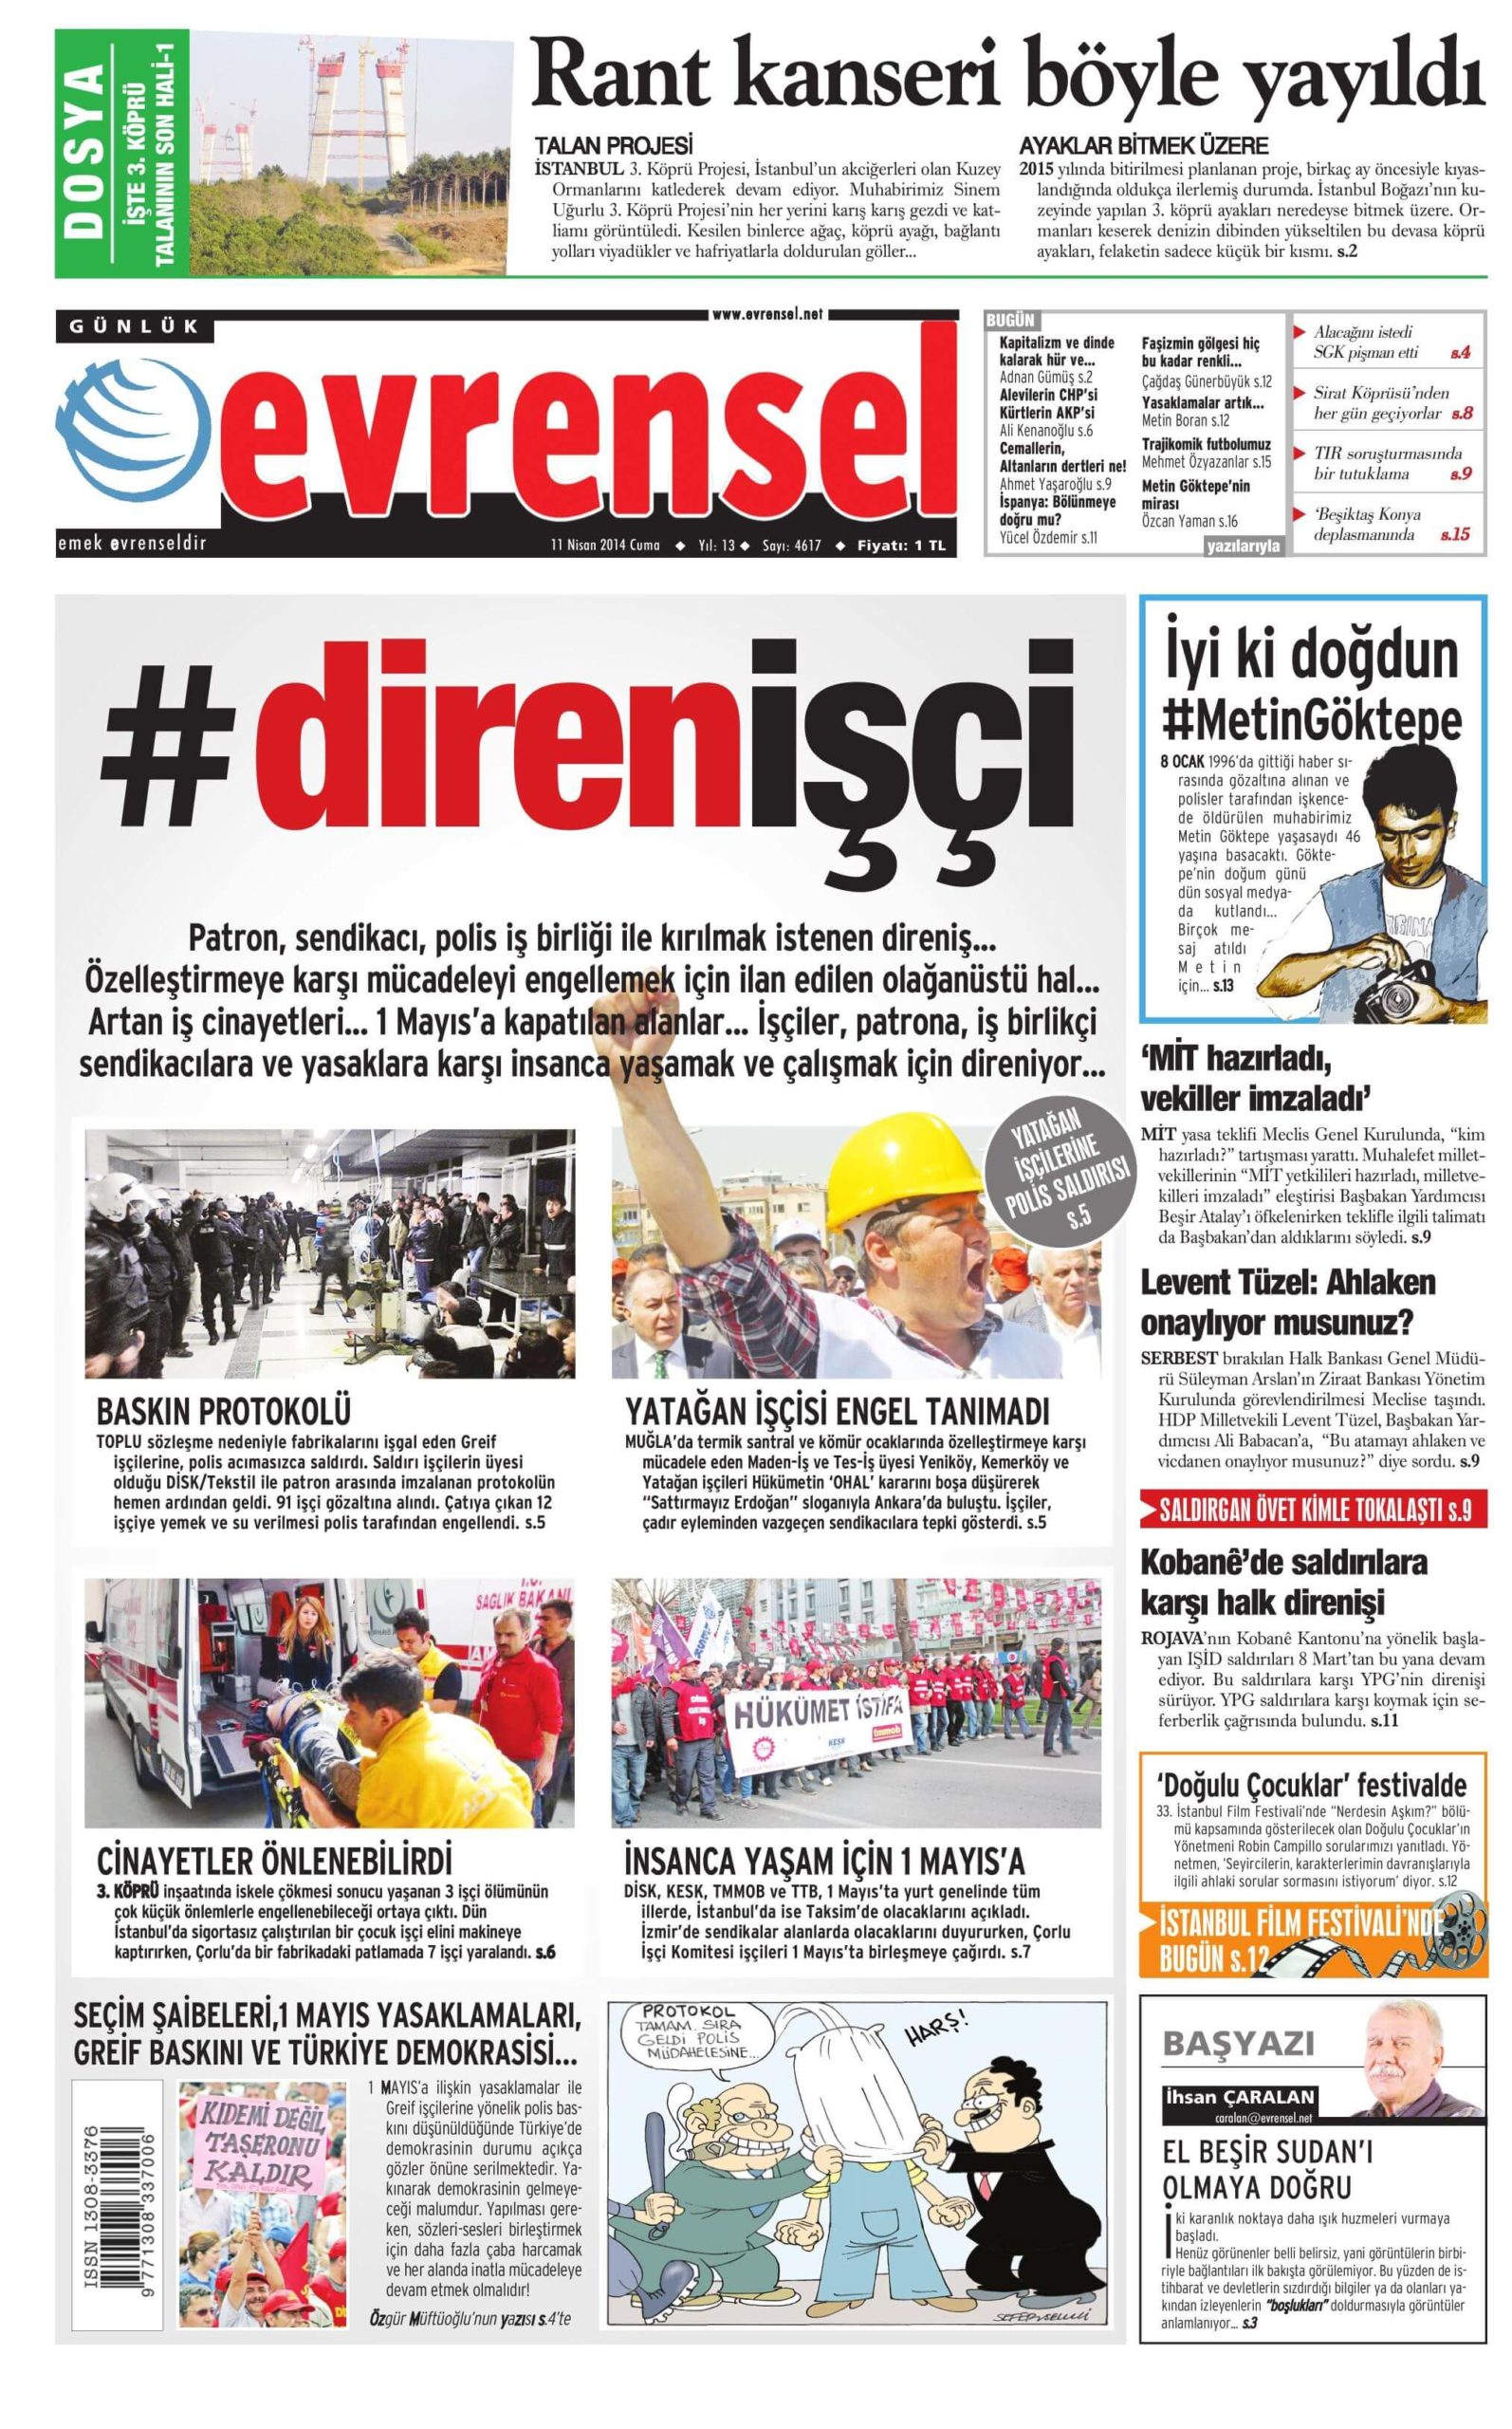 Turkish Newspapers 34 Evrensel scaled